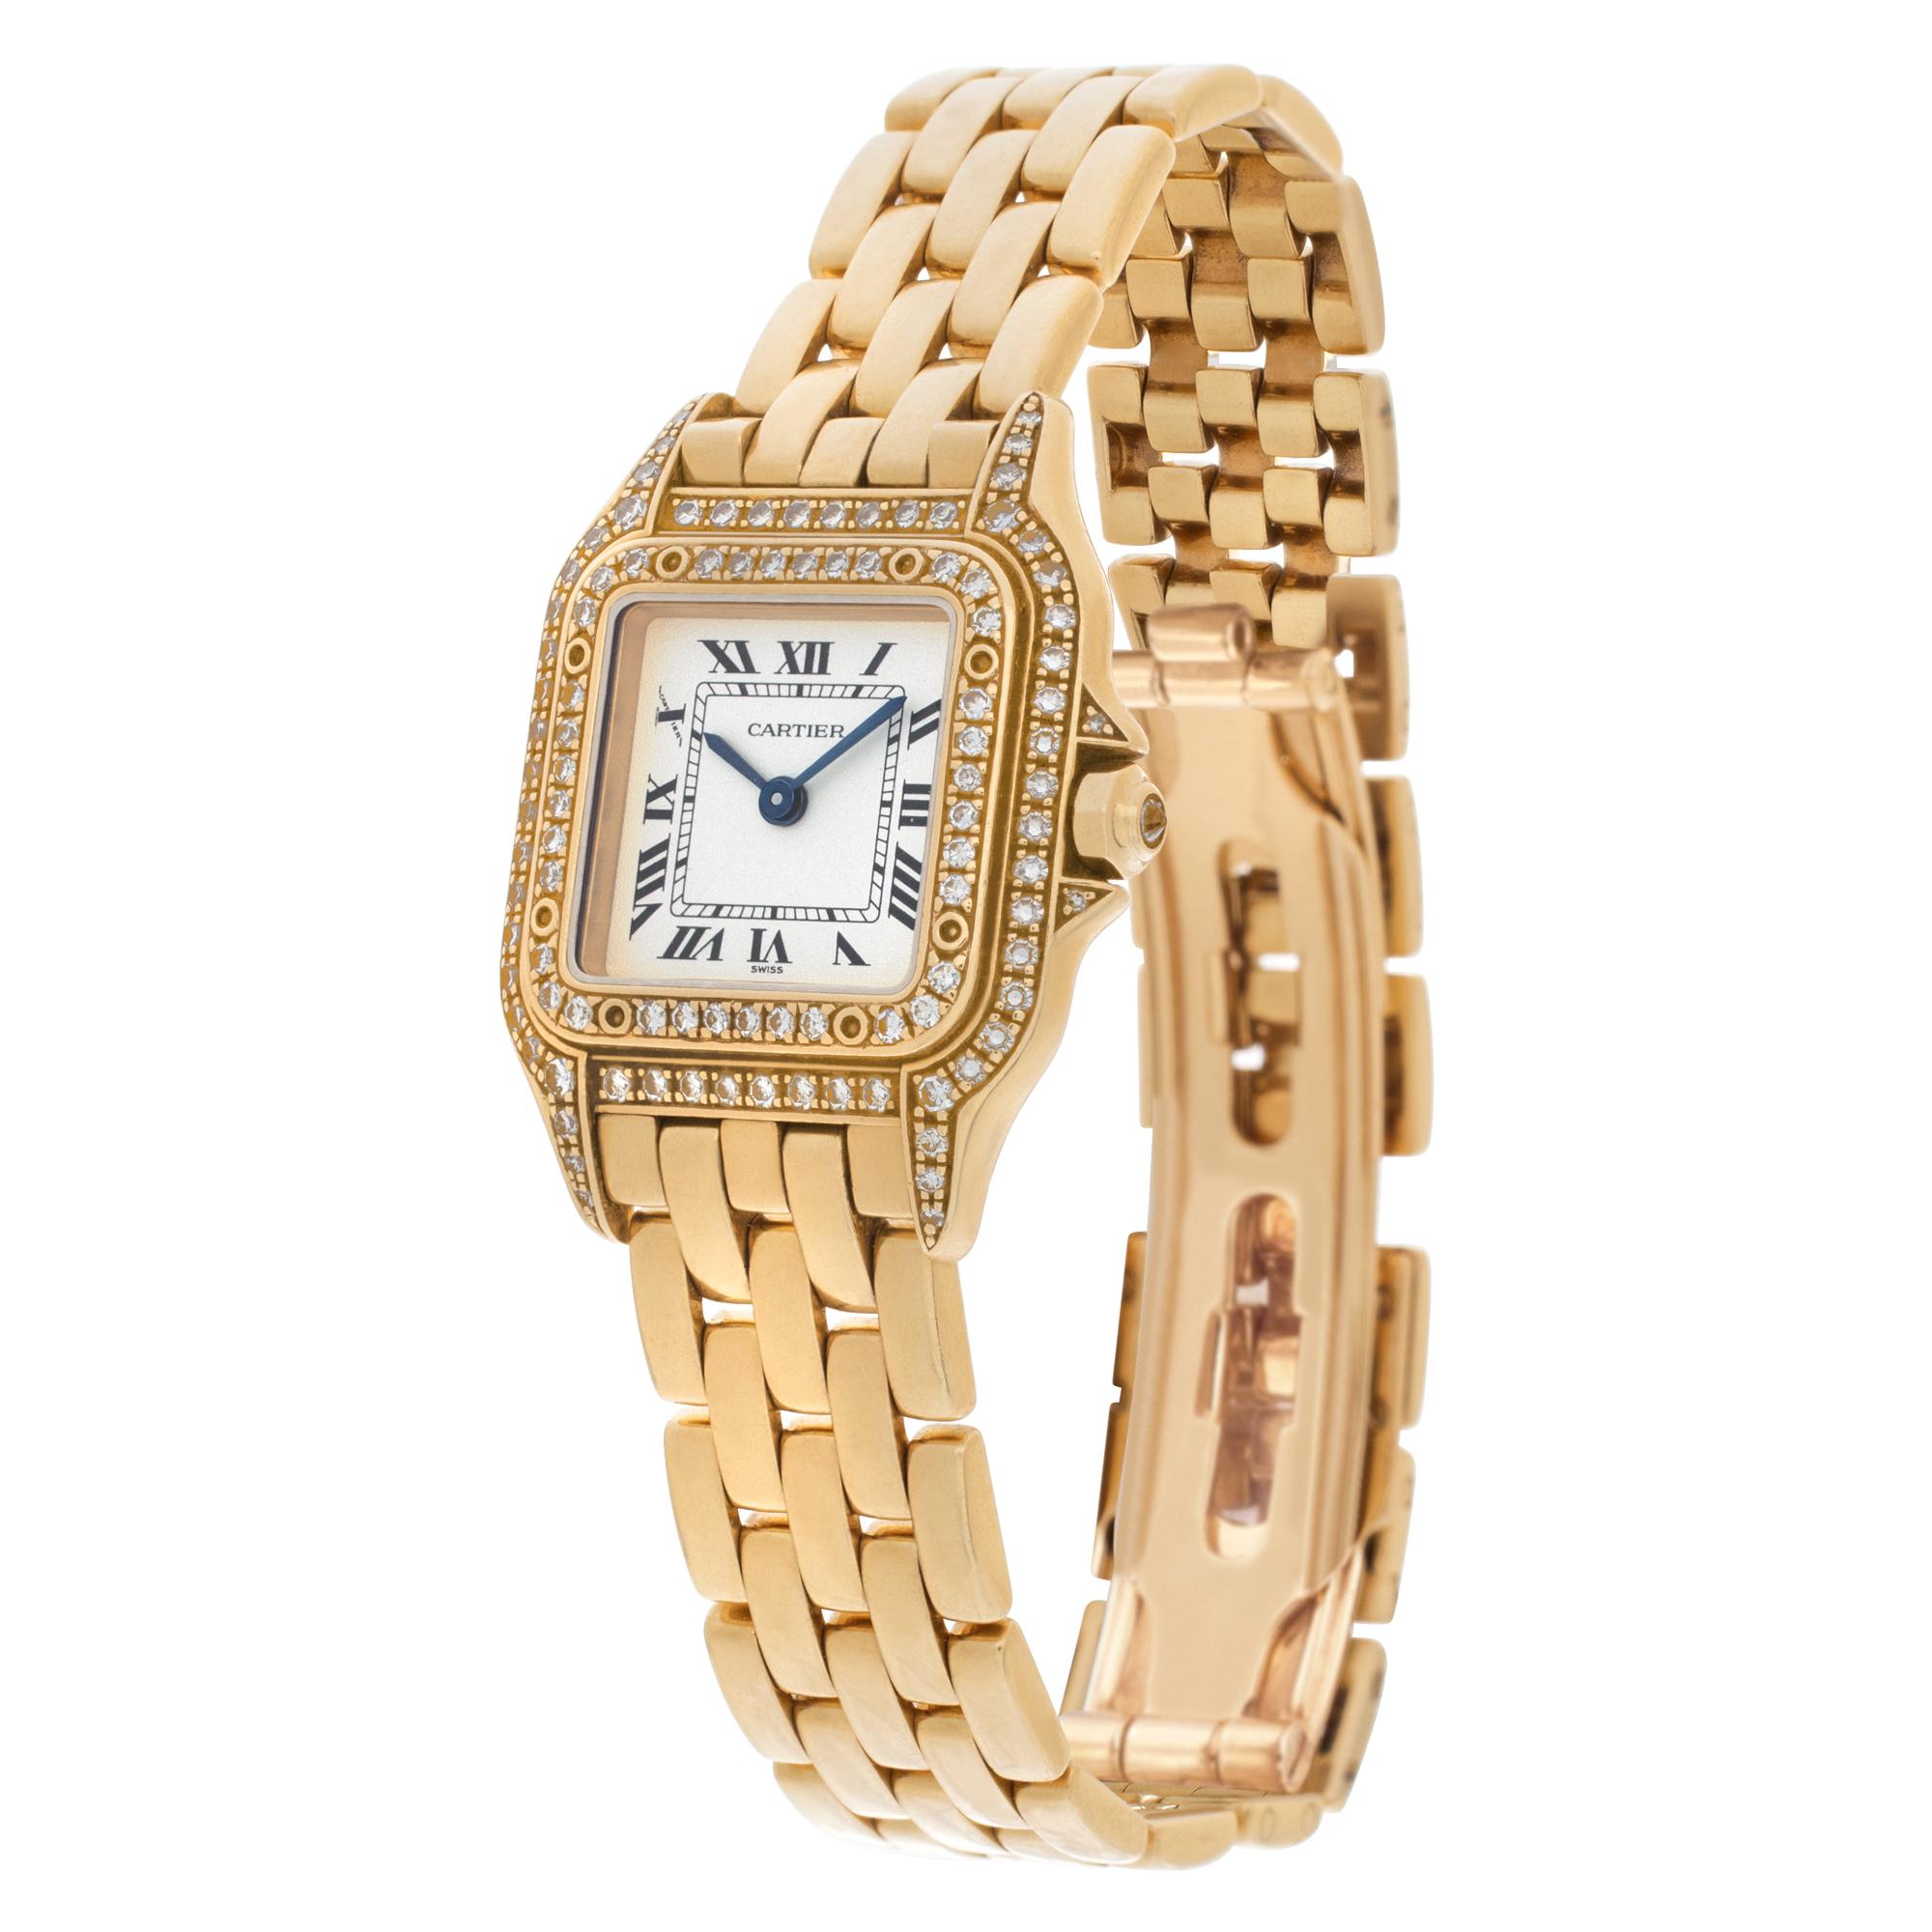 ICONIC! Cartier Panthere in 18k with original diamond bezel, diamond lugs and diamond case. Quartz with date. 22 mm case size. Ref WF3072B9 Fine Pre-owned Cartier Watch.

Certified preowned Dress Cartier Panthere WF3072B9 watch is made out of yellow